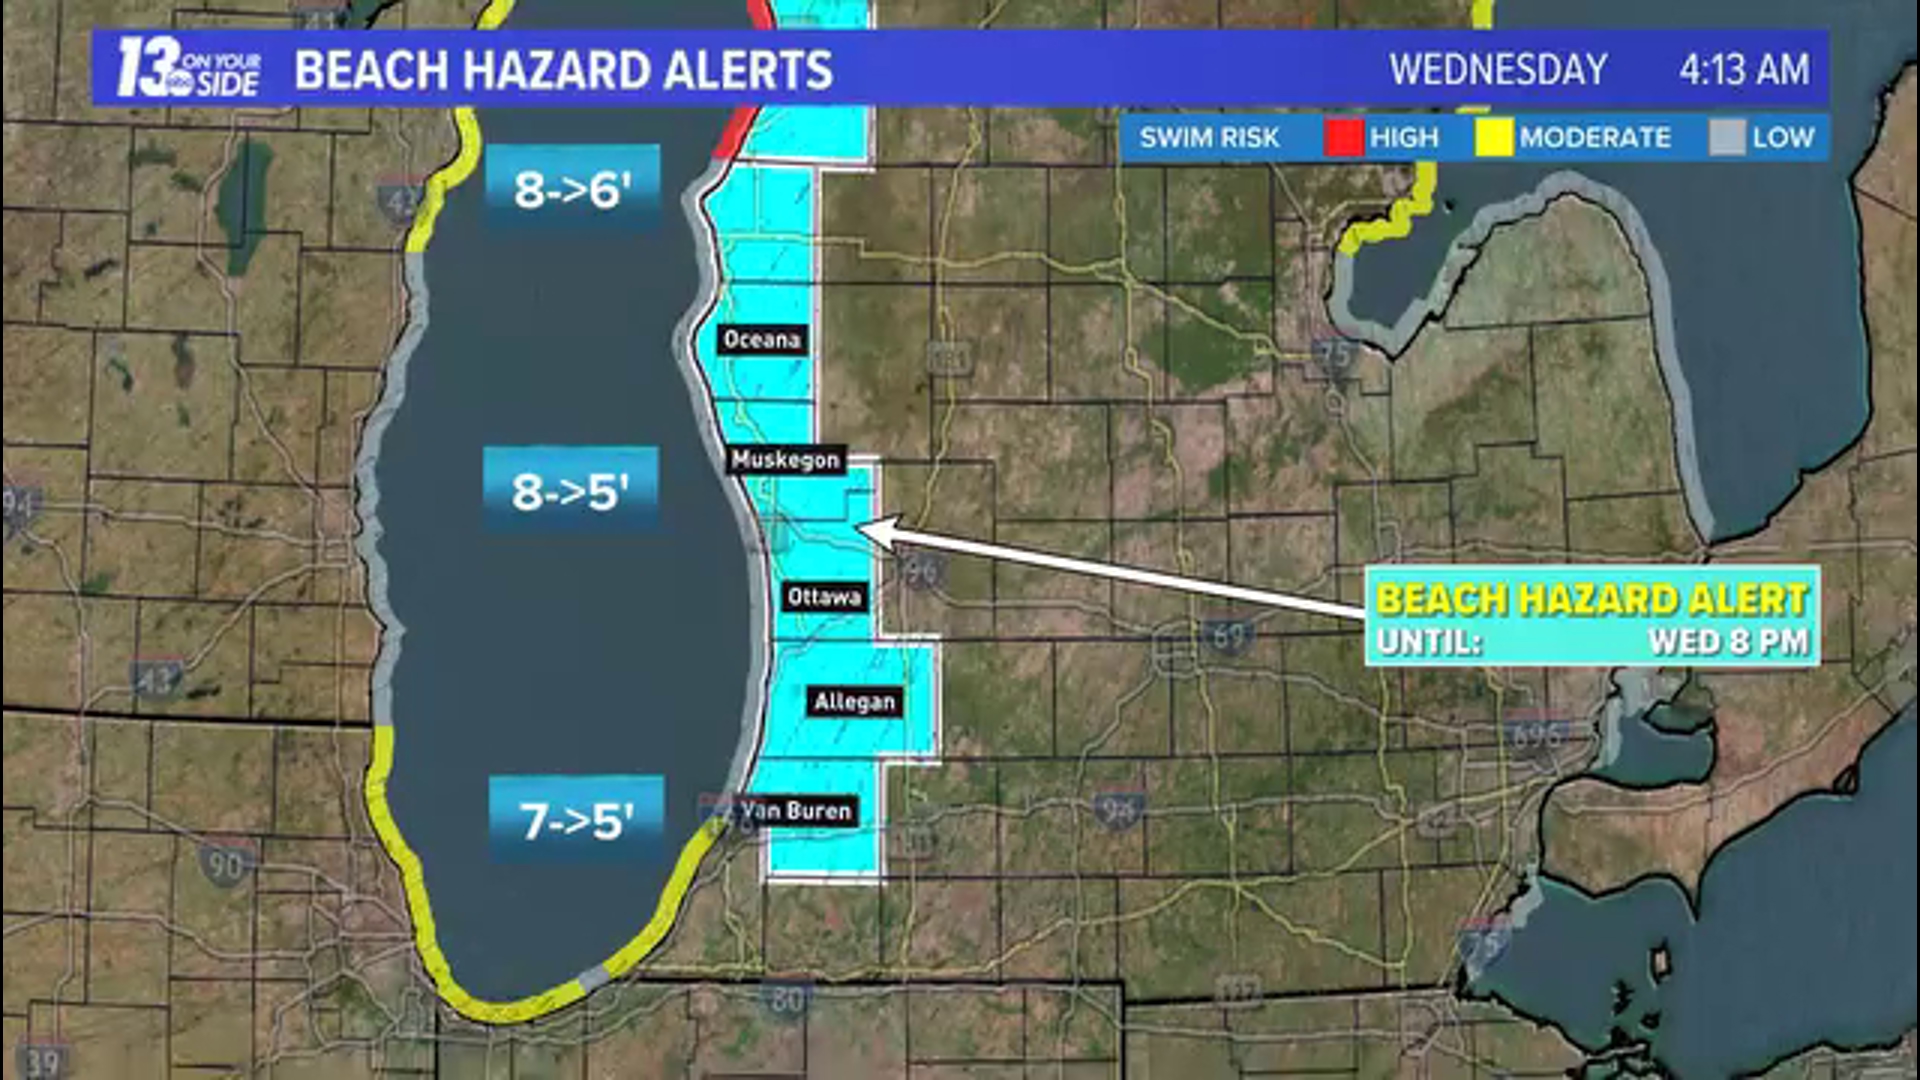 Strong waves and currents are expected as far south as St. Joseph to the Manistee area. This remains in effect until 8 p.m.